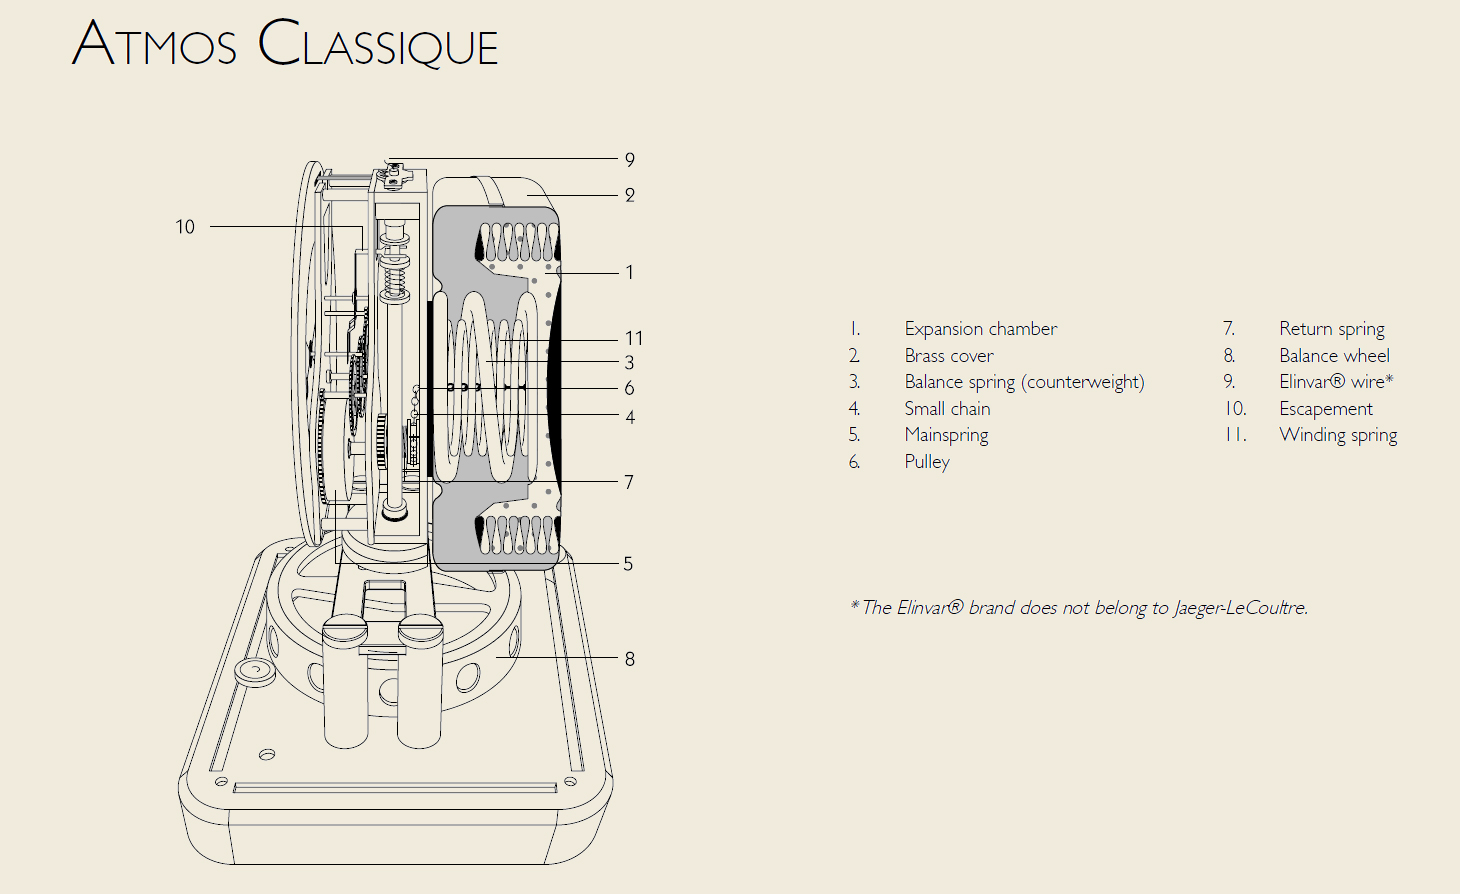 Atmos Classique Page 1 Img